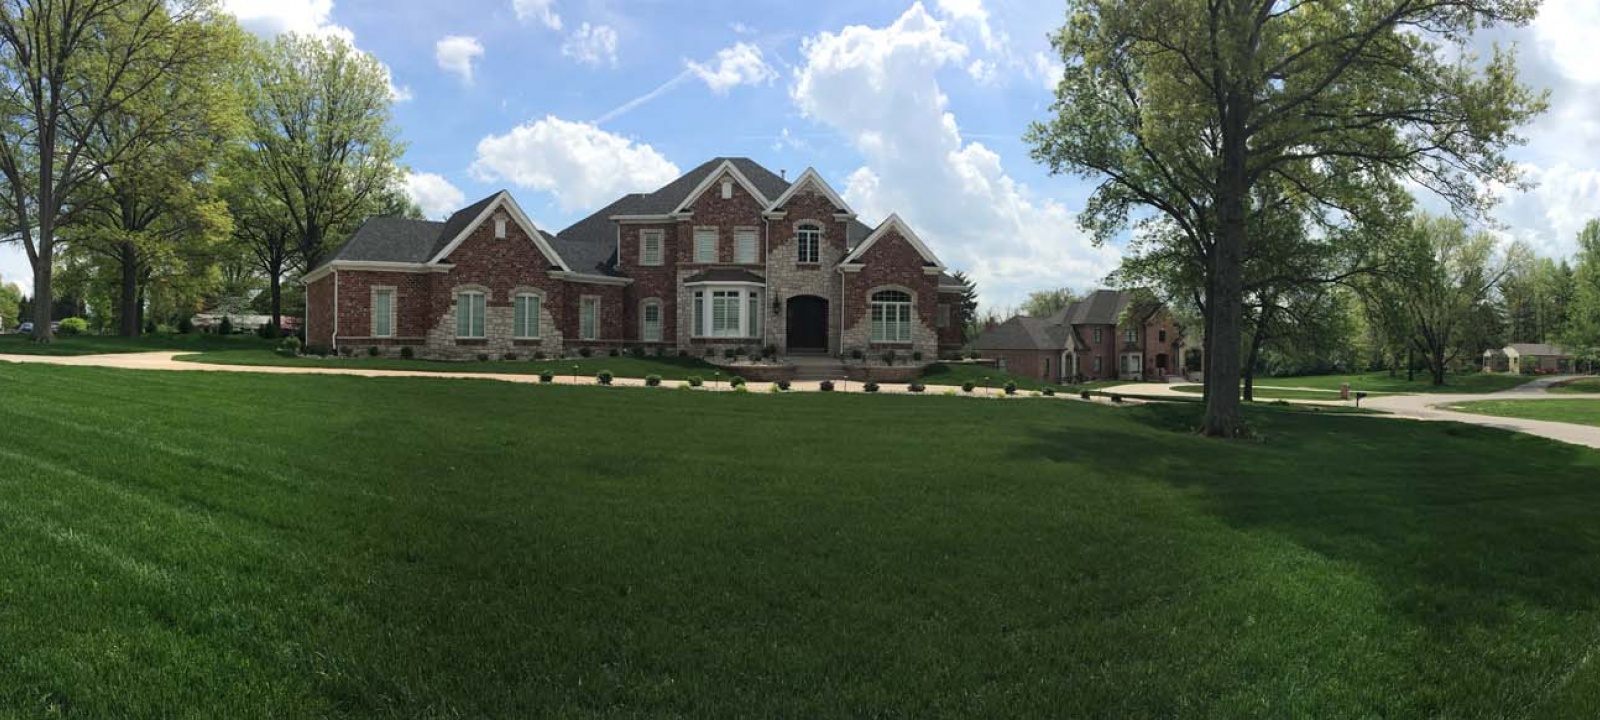 12 Ballas Court, Town and Country, Missouri 63131, 5 Bedrooms Bedrooms, ,5 BathroomsBathrooms,House,Completed,Ballas Court,1011